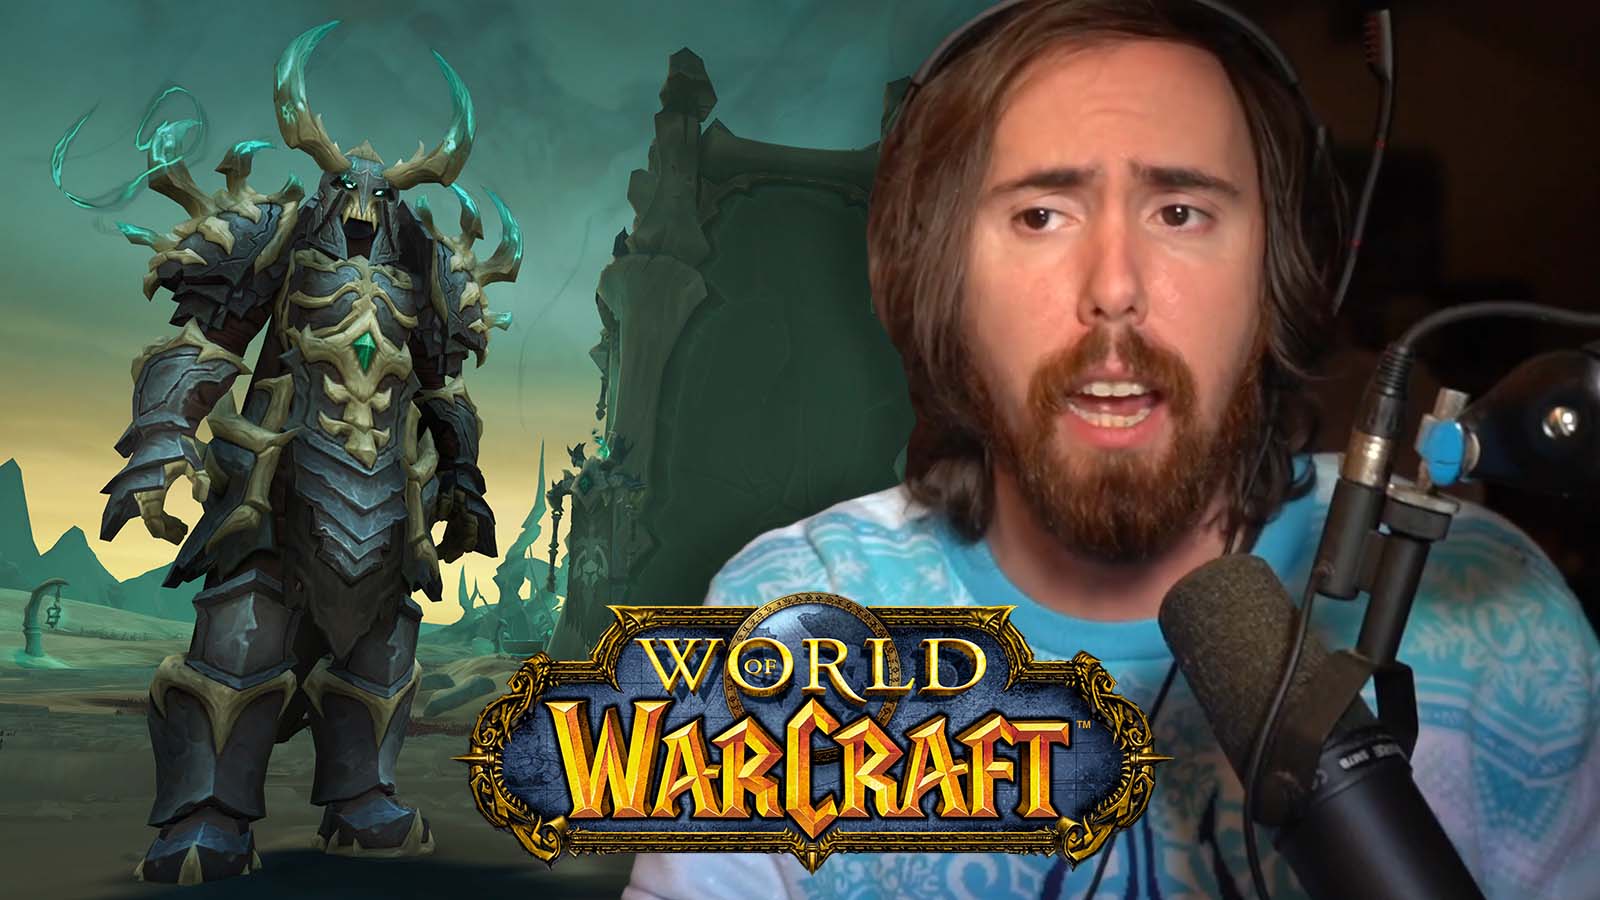 Asmongold shuts down claims he abandoned World of Warcraft: "I did not quit"